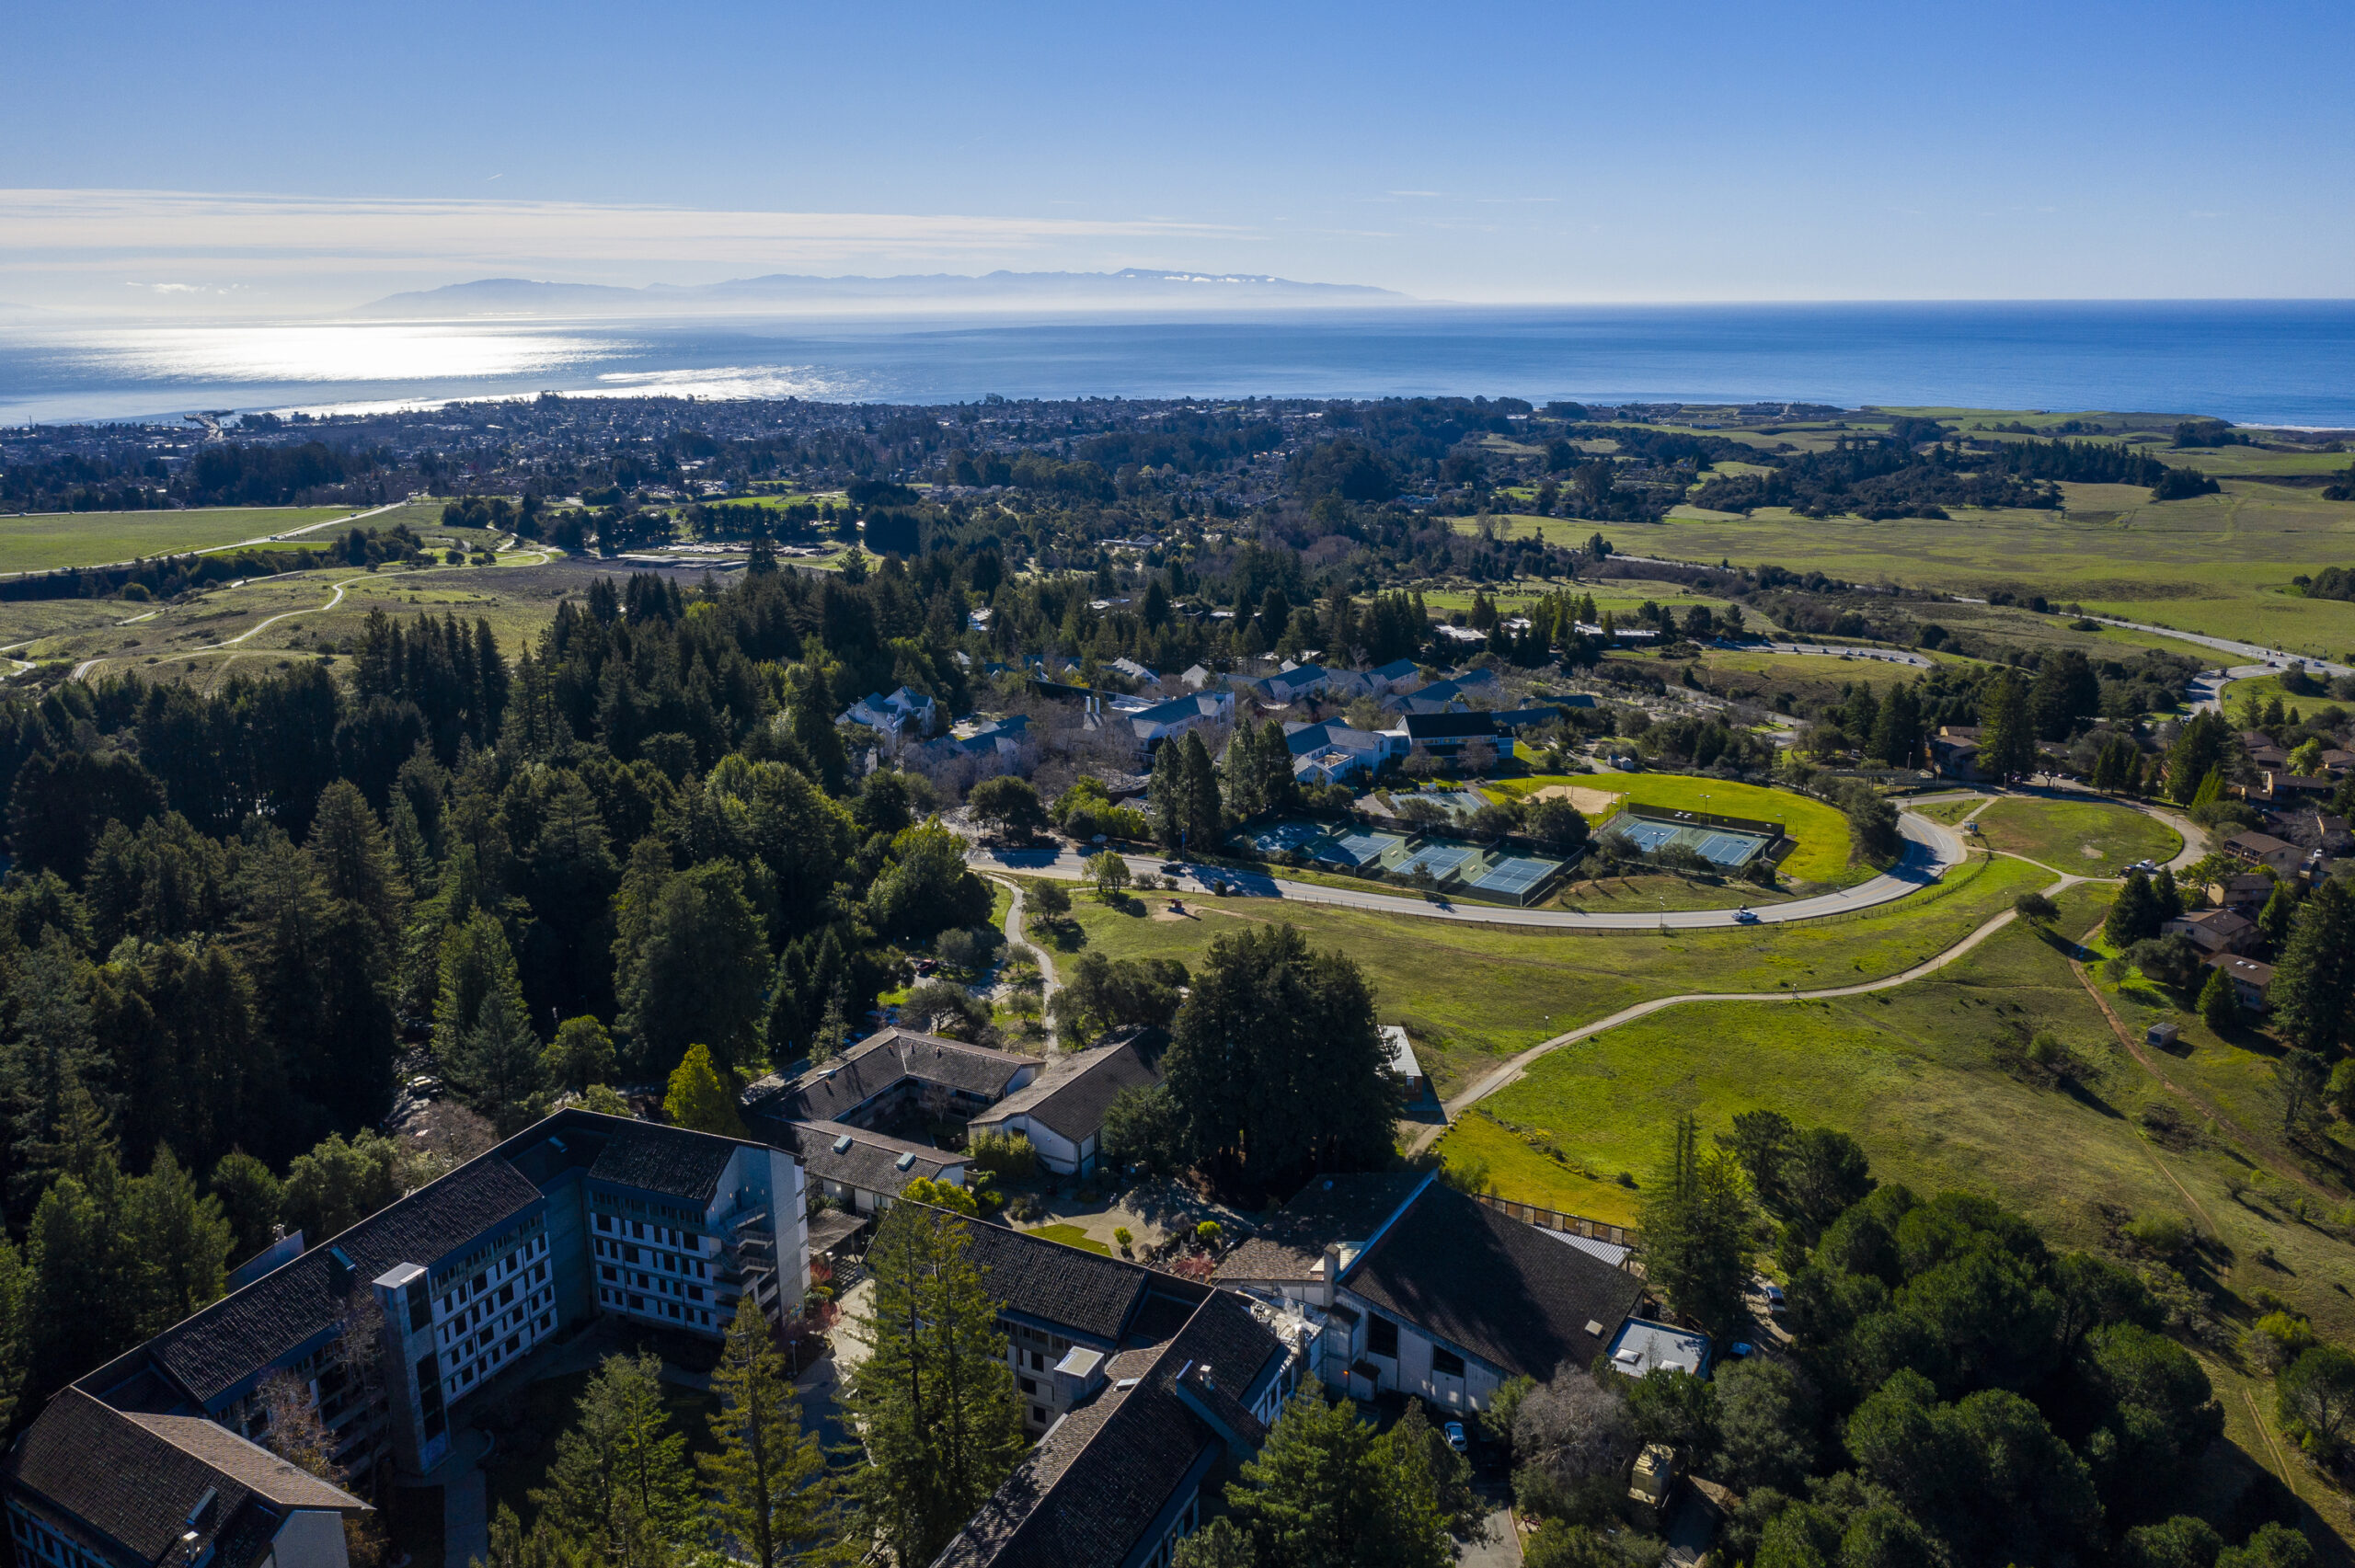 Aerial shot of campus with Monterey Bay in the background.